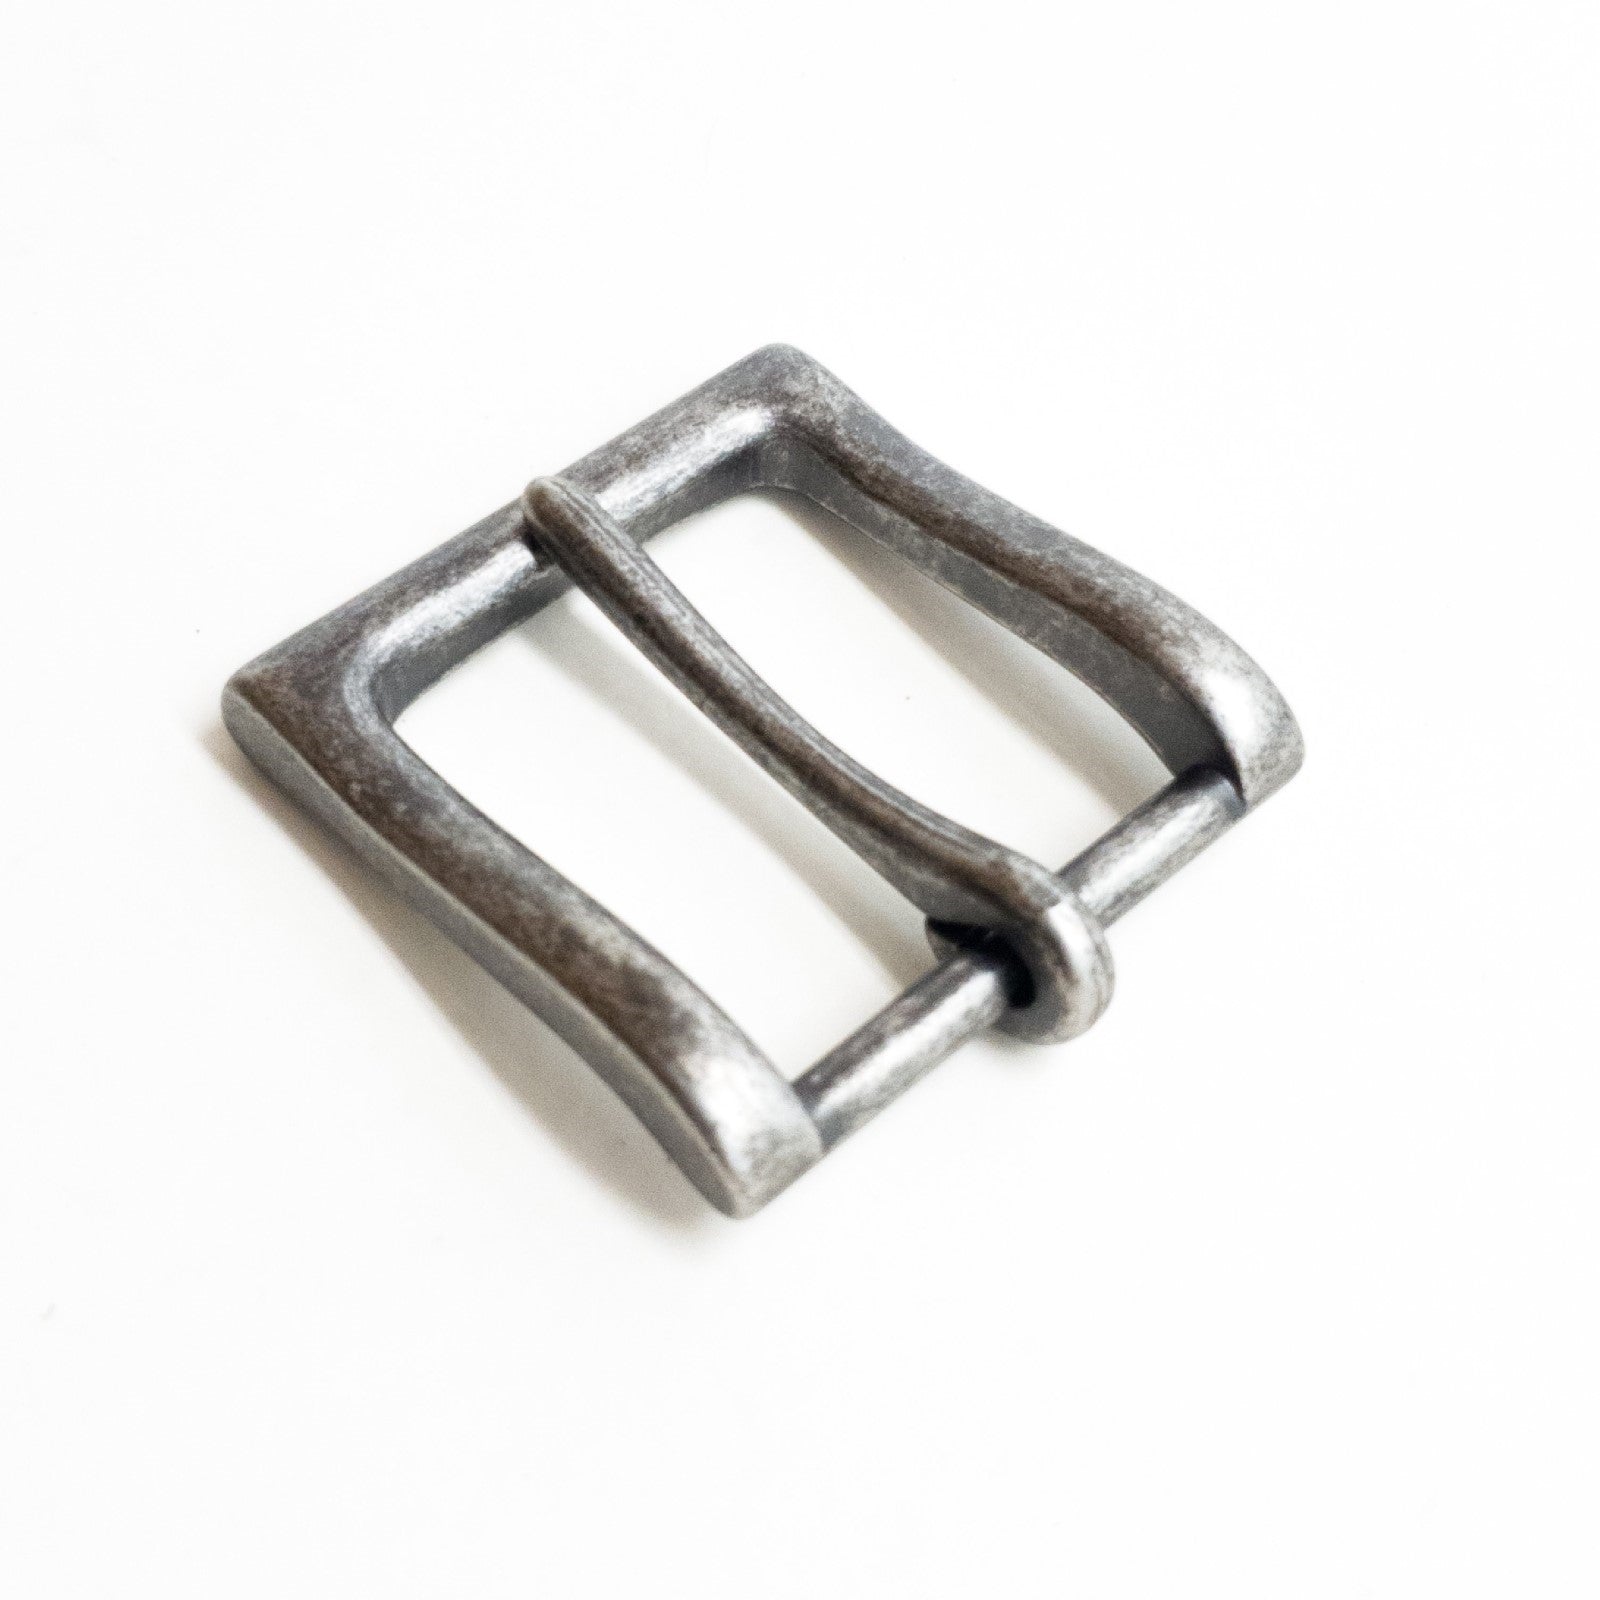 Belt Buckles 1.25" - 1.5" Hardware, 1 1/4" / Antique Nickel | The Leather Guy